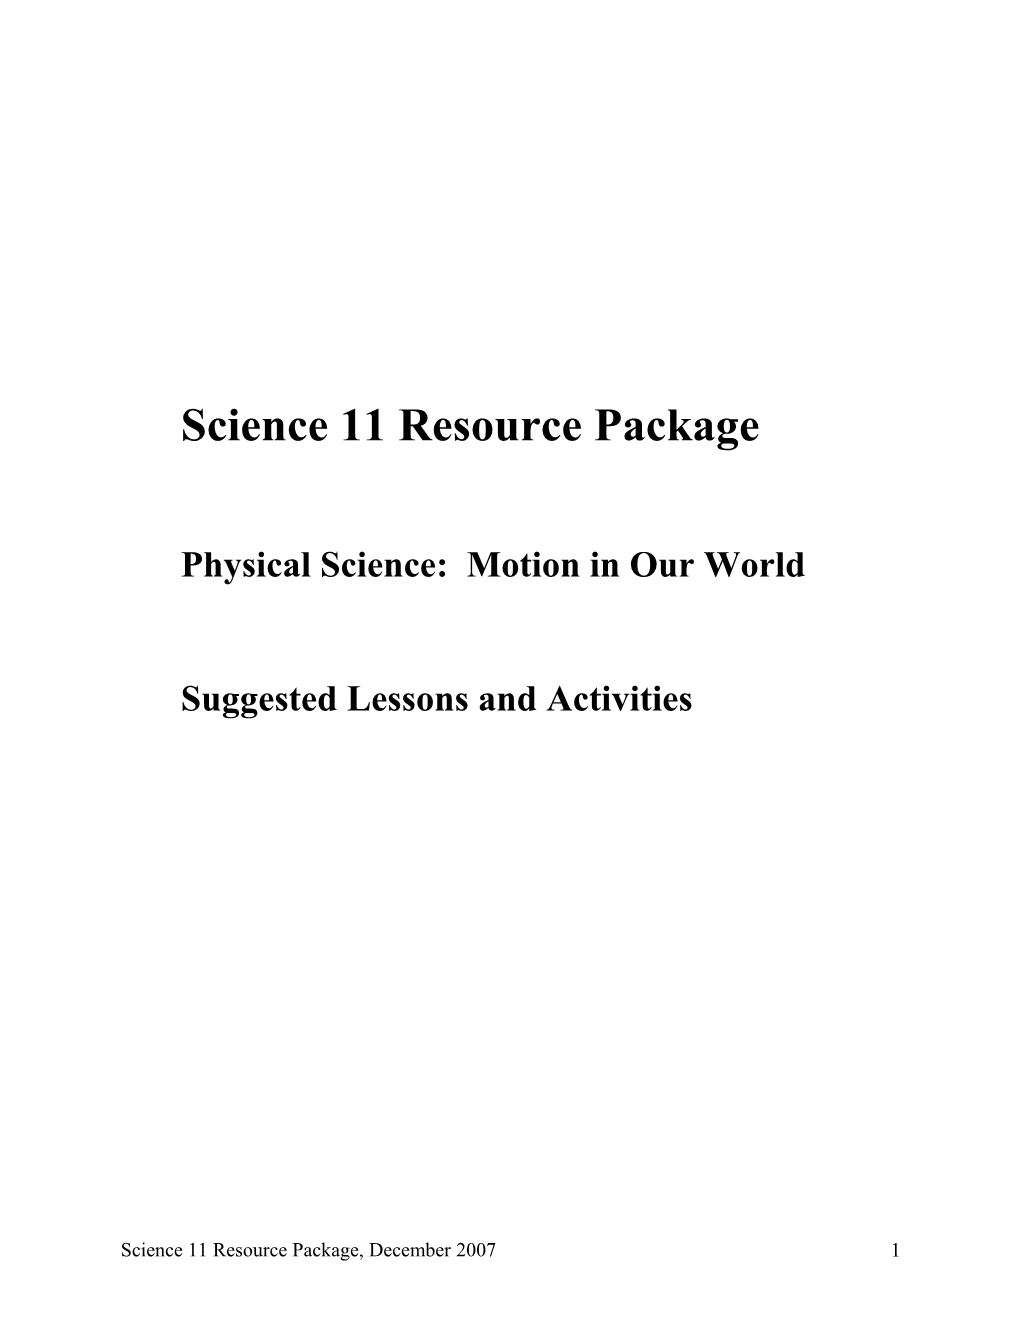 Physical Science: Motion in Our World